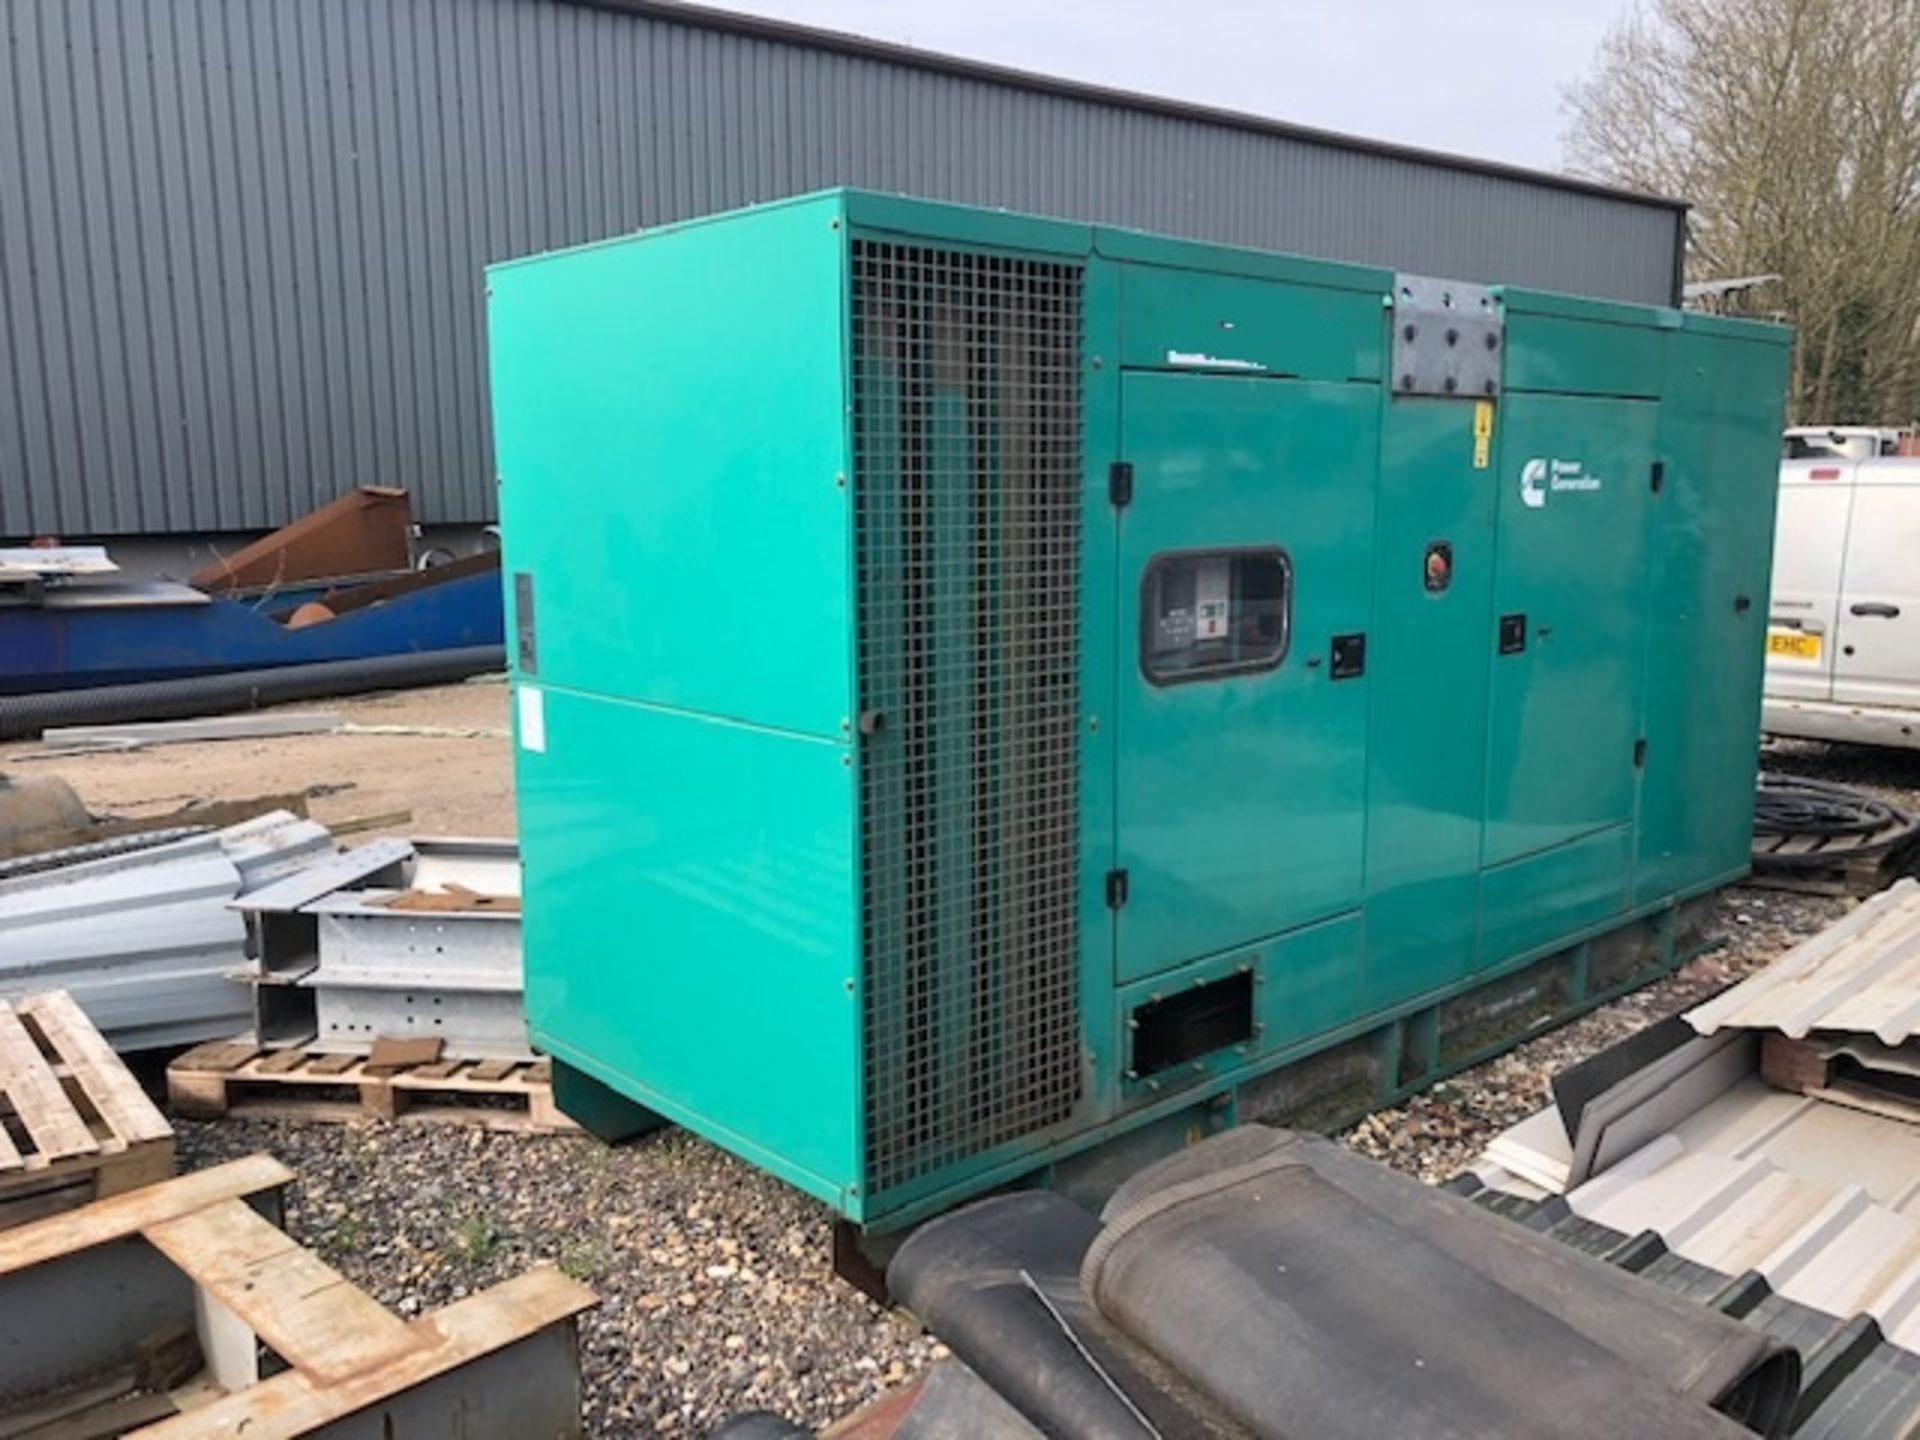 CUMMINS ENGINED 300KVA GENERATOR YEAR 2012 8367 REC HRS. DIRECT FROM LOCAL COMPANY AFTER UPGRADING - Image 2 of 14